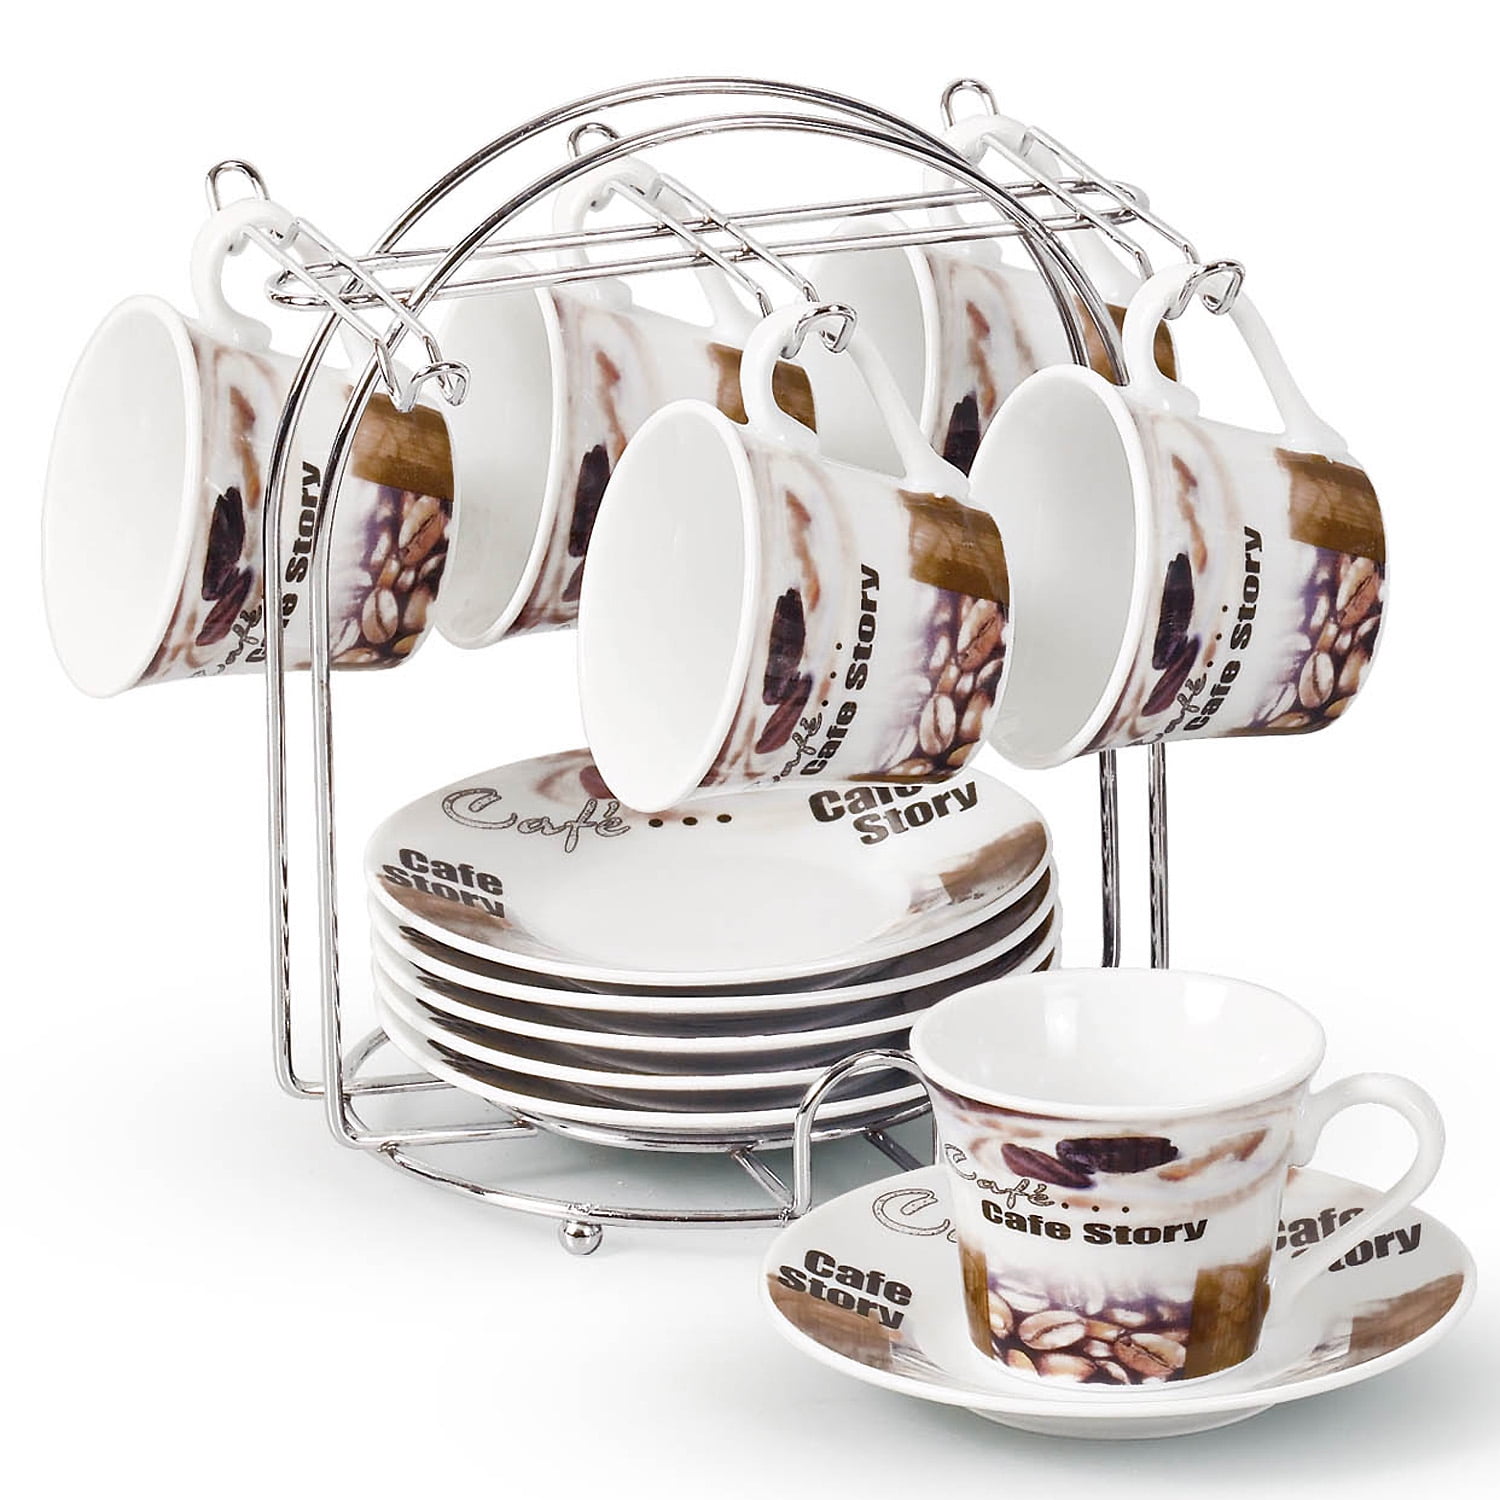 Lareina Espresso Cups with Saucers, Spoons and Metal Stand, Small